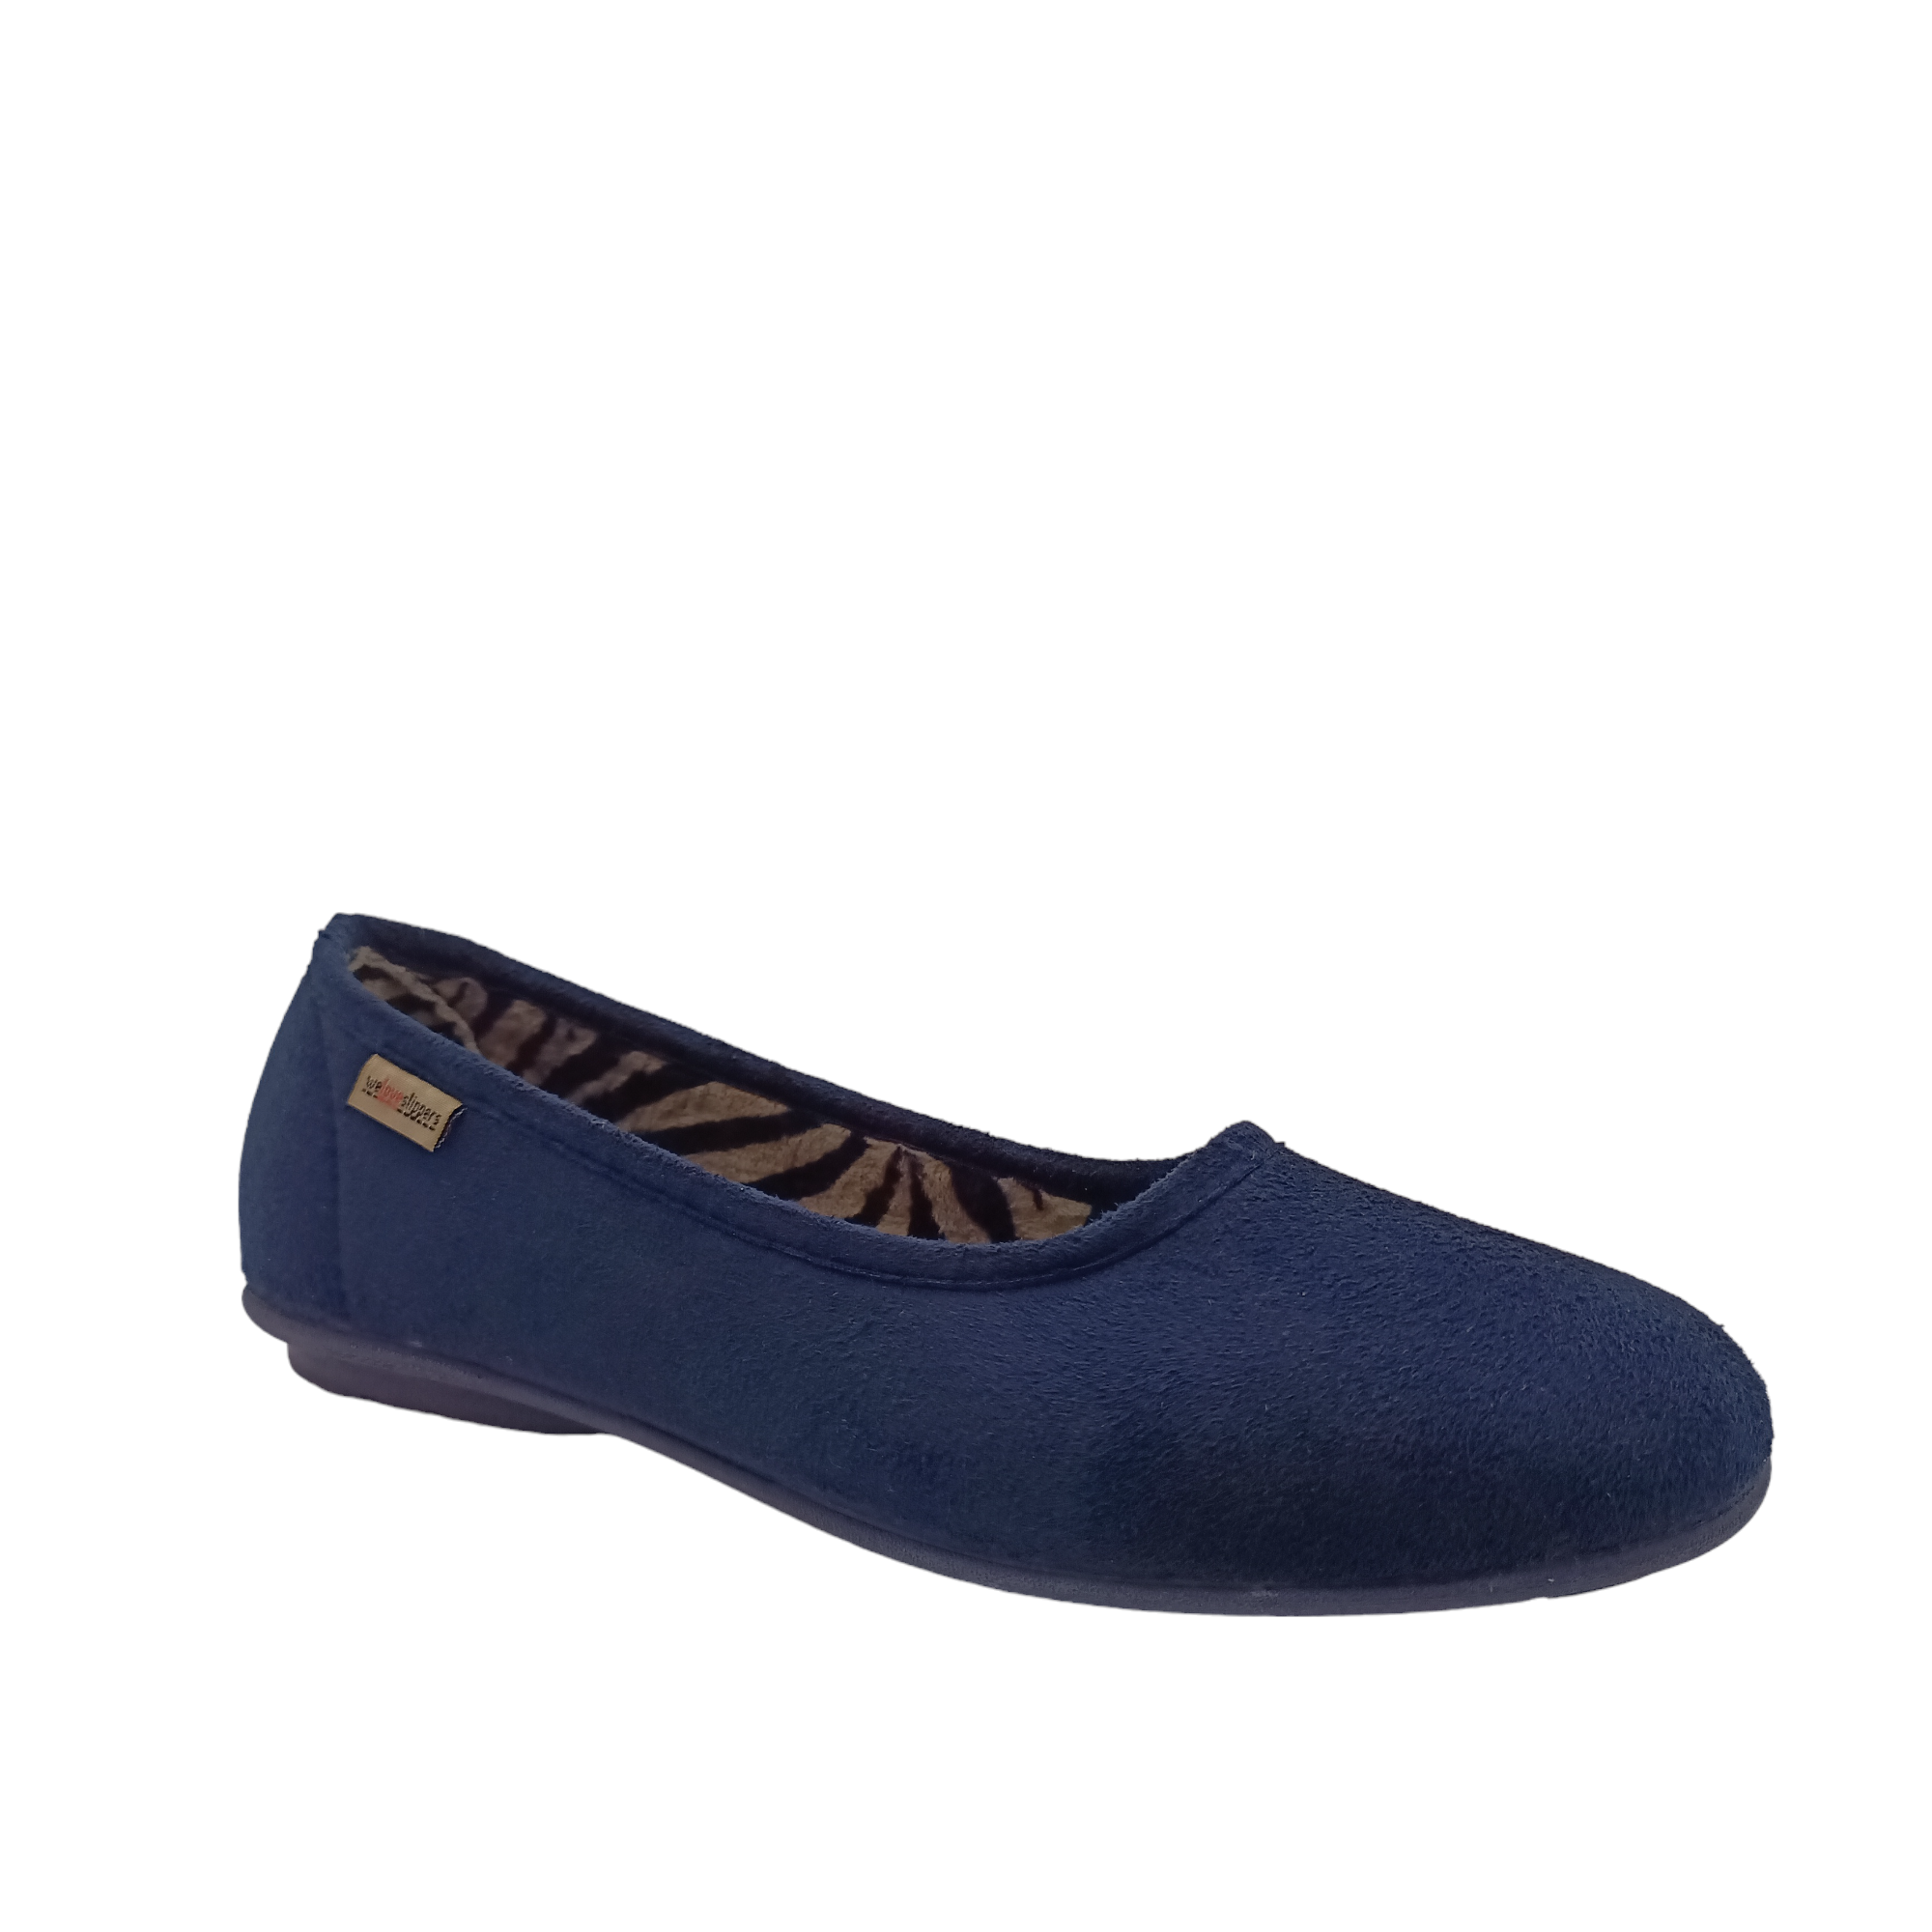 Front view of navy Nuzzle Slippers with zebra print lining. Shop Womens Slippers and Shoes Online and In-store with shoe&me.